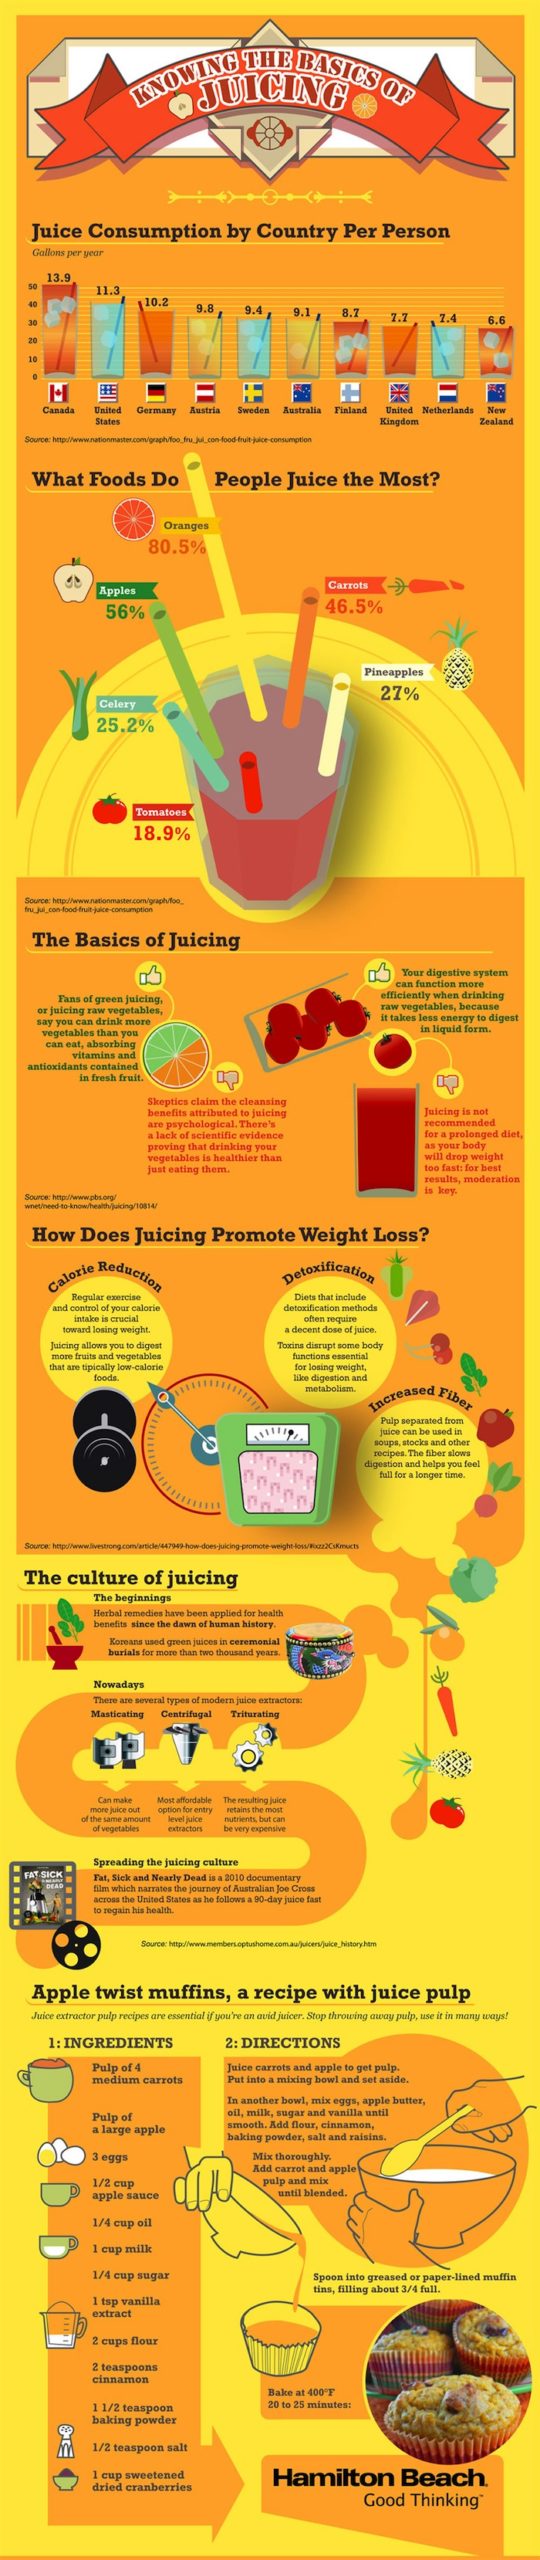 Blog for The Facts About Juicing: An Infographic